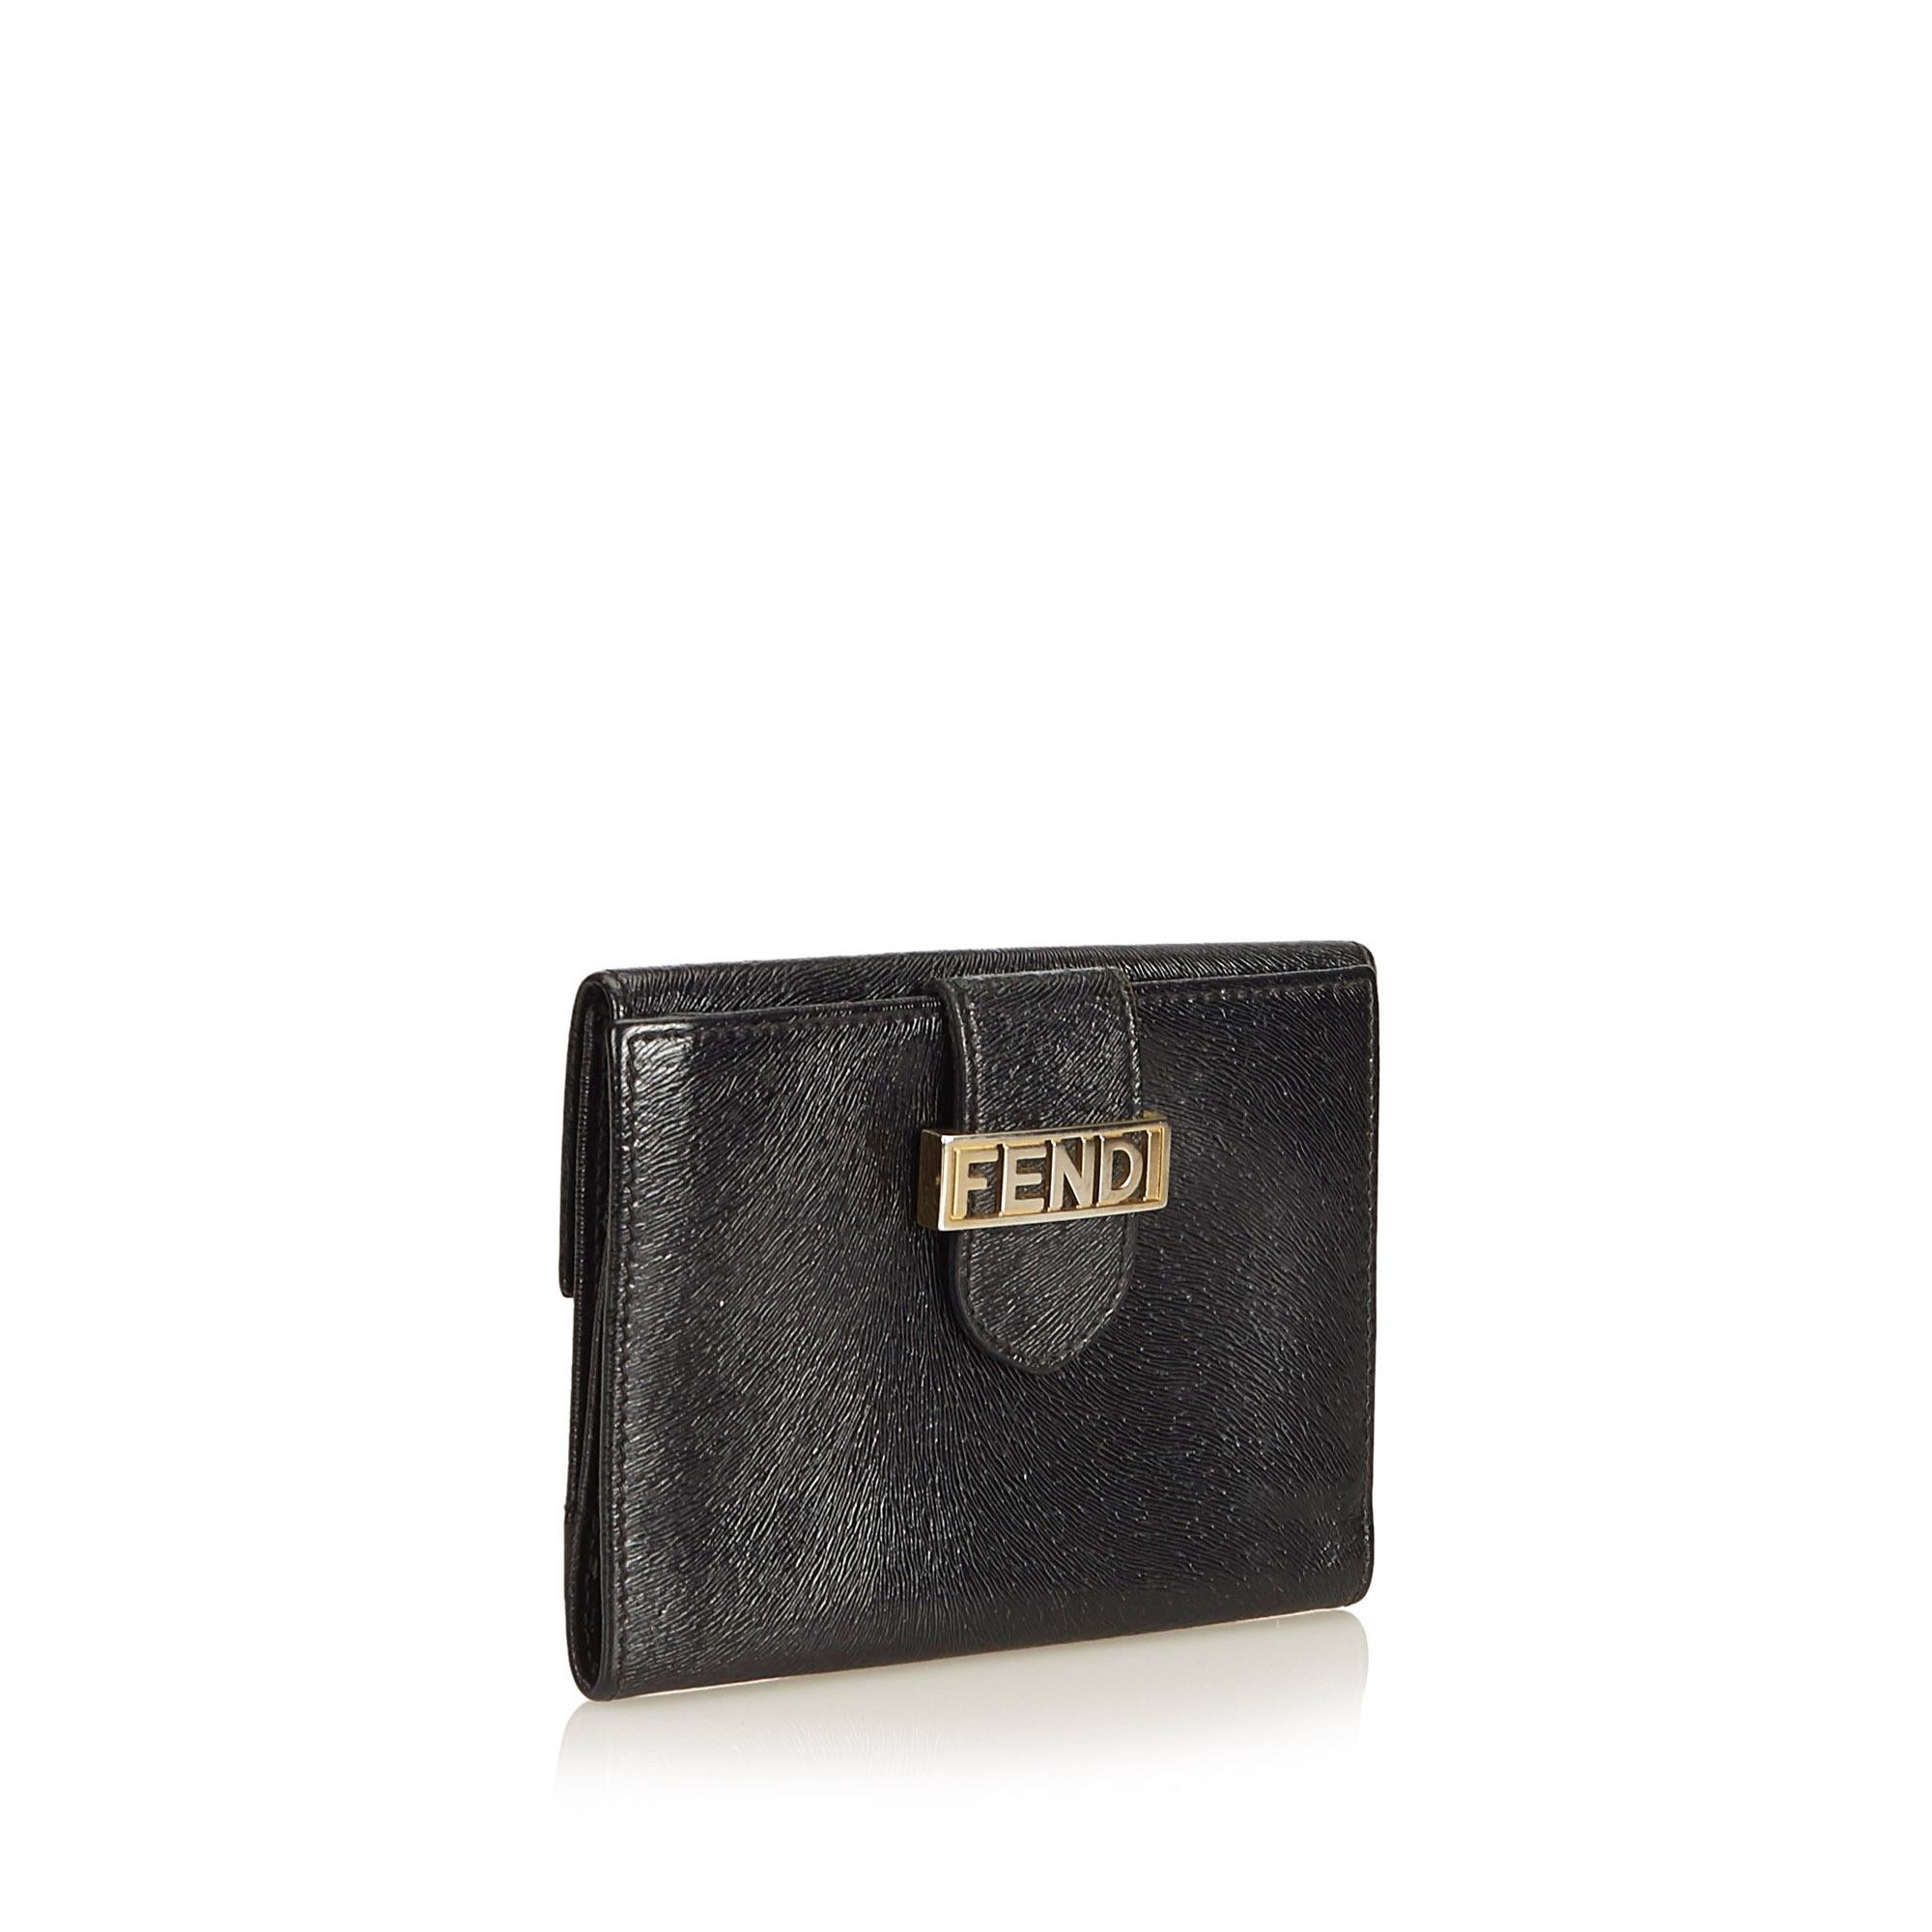 This small wallet features a leather body, flat strap with gold-toned hardware and button clasp closure, and interior slip pockets. It carries as B+ condition rating.

Inclusions: 
This item does not come with inclusions.

Dimensions:
Length: 9.50